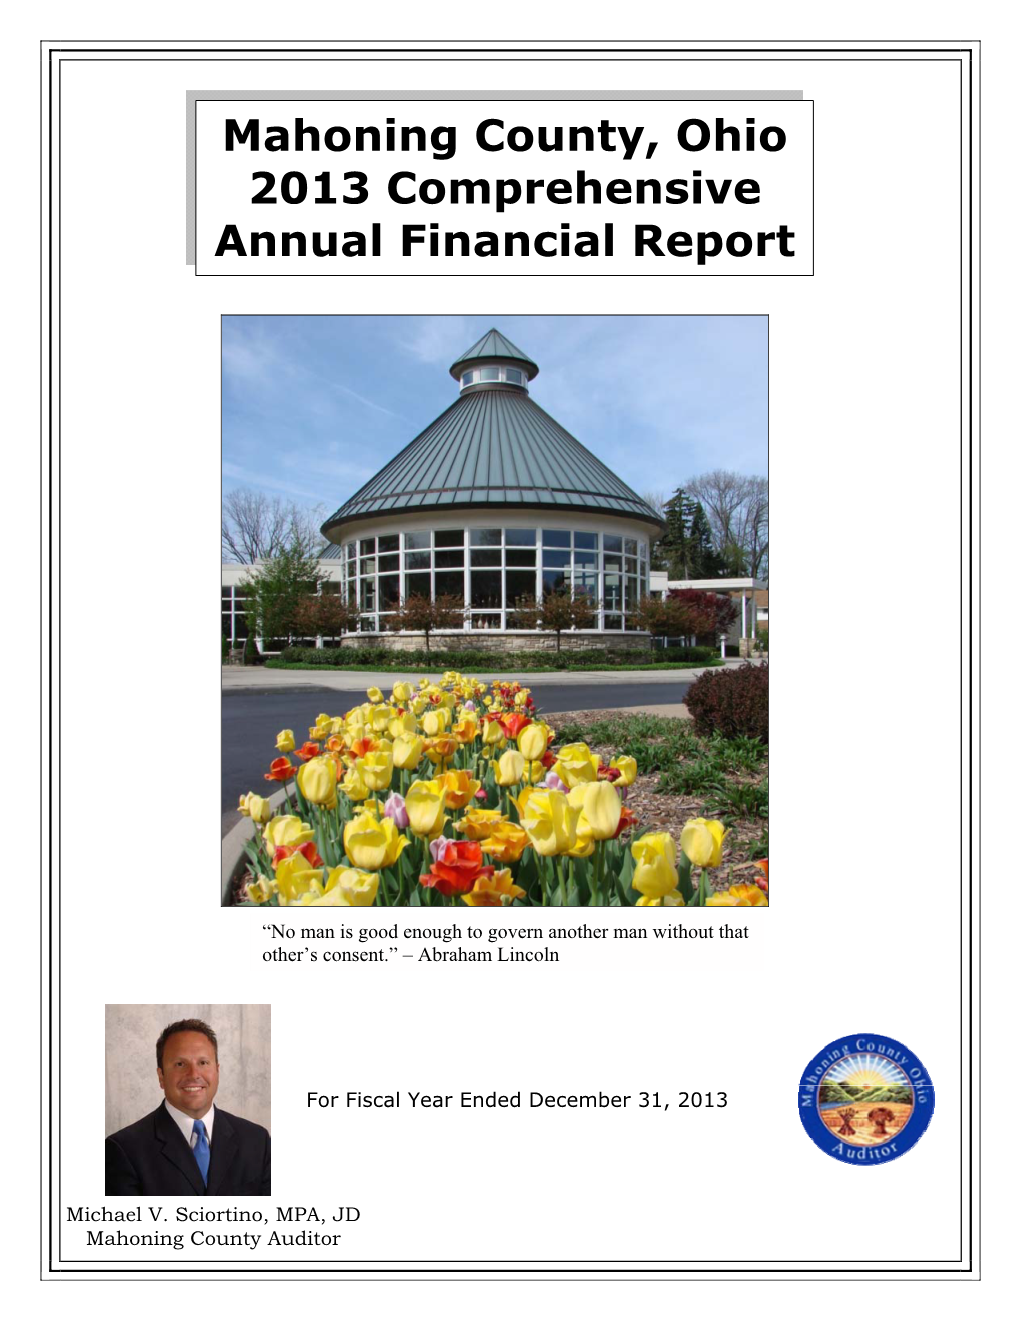 Mahoning County, Ohio 2013 Comprehensive Annual Financial